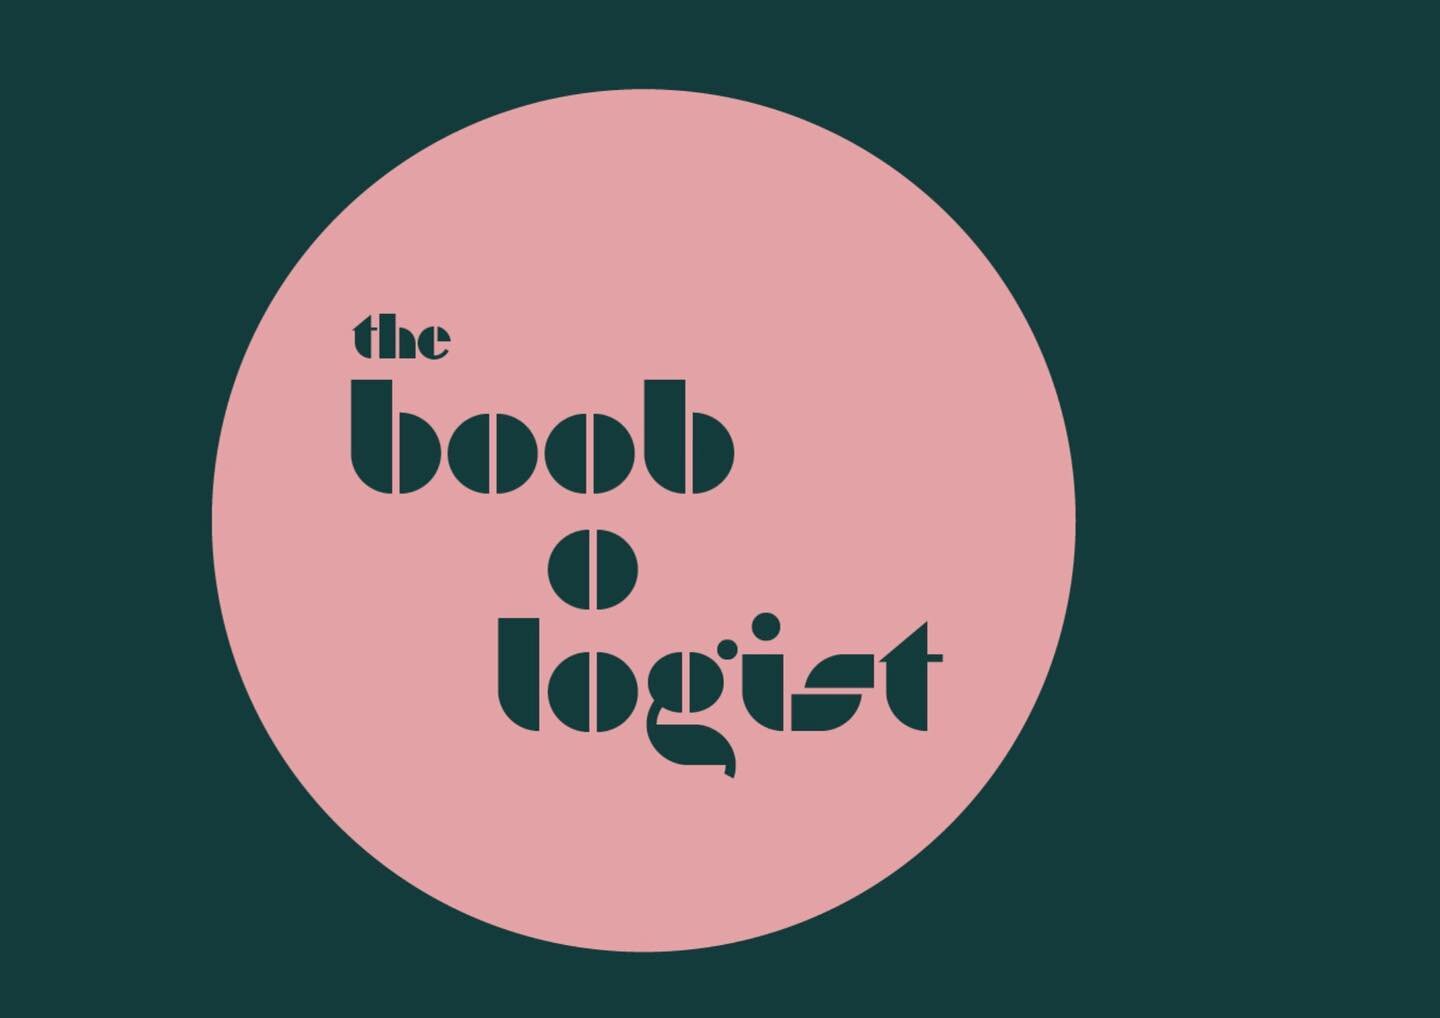 Hi everyone check out my new website theboobologist.co